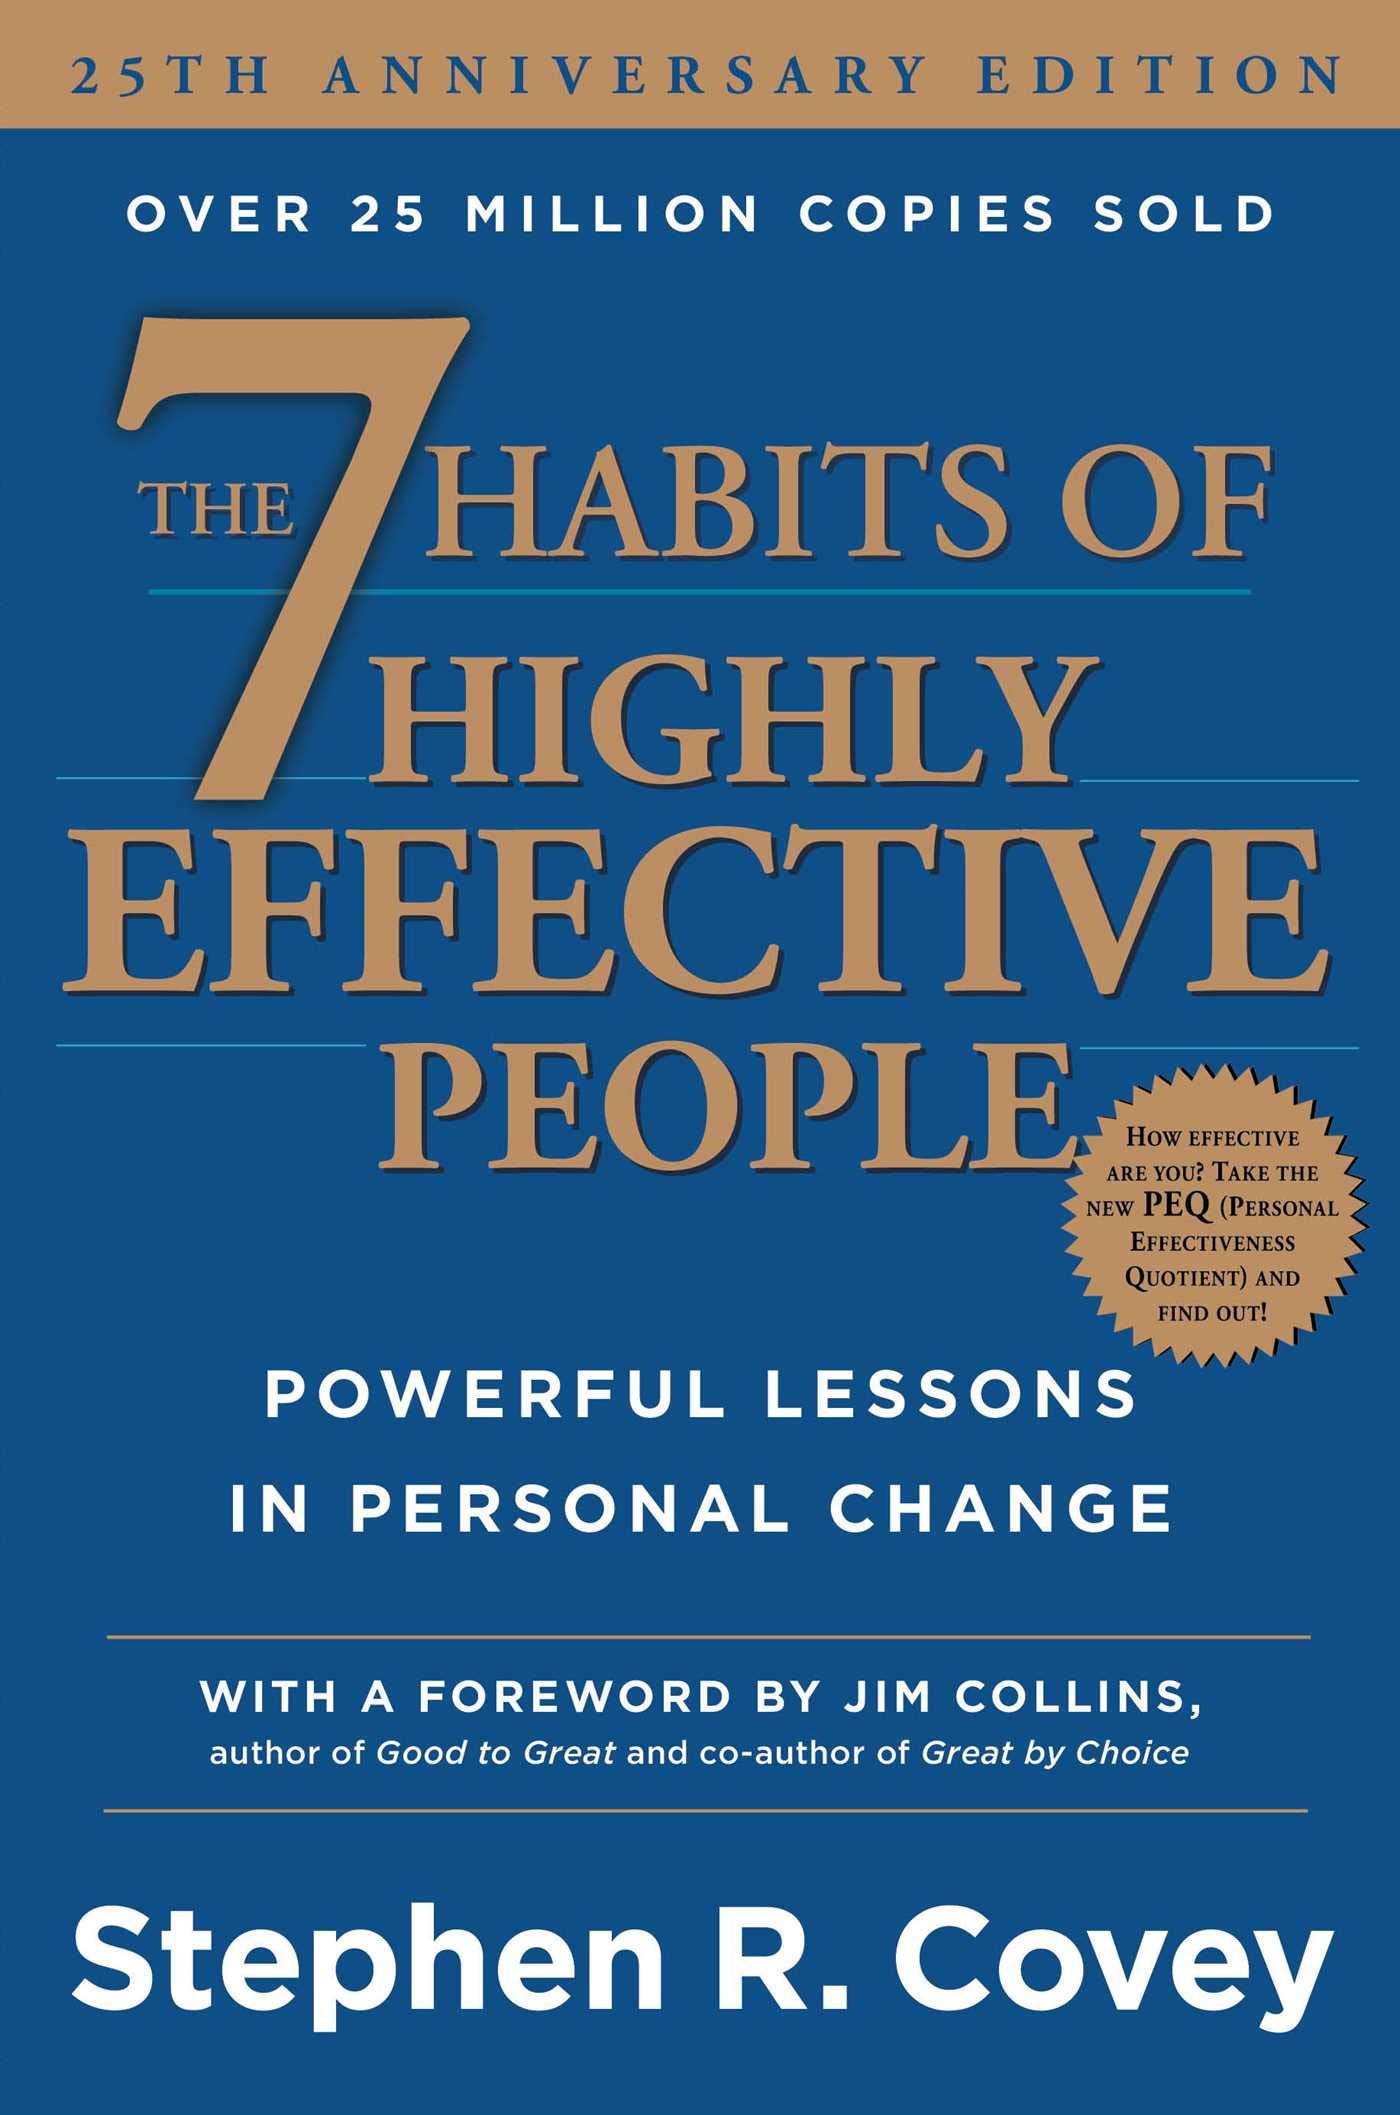 Change　Stephen　Covey,　By　Effective　Highly　Powerful　The　Habits　People:　R.　Paperback　Lazada　Of　Lessons　Personal　In　PH